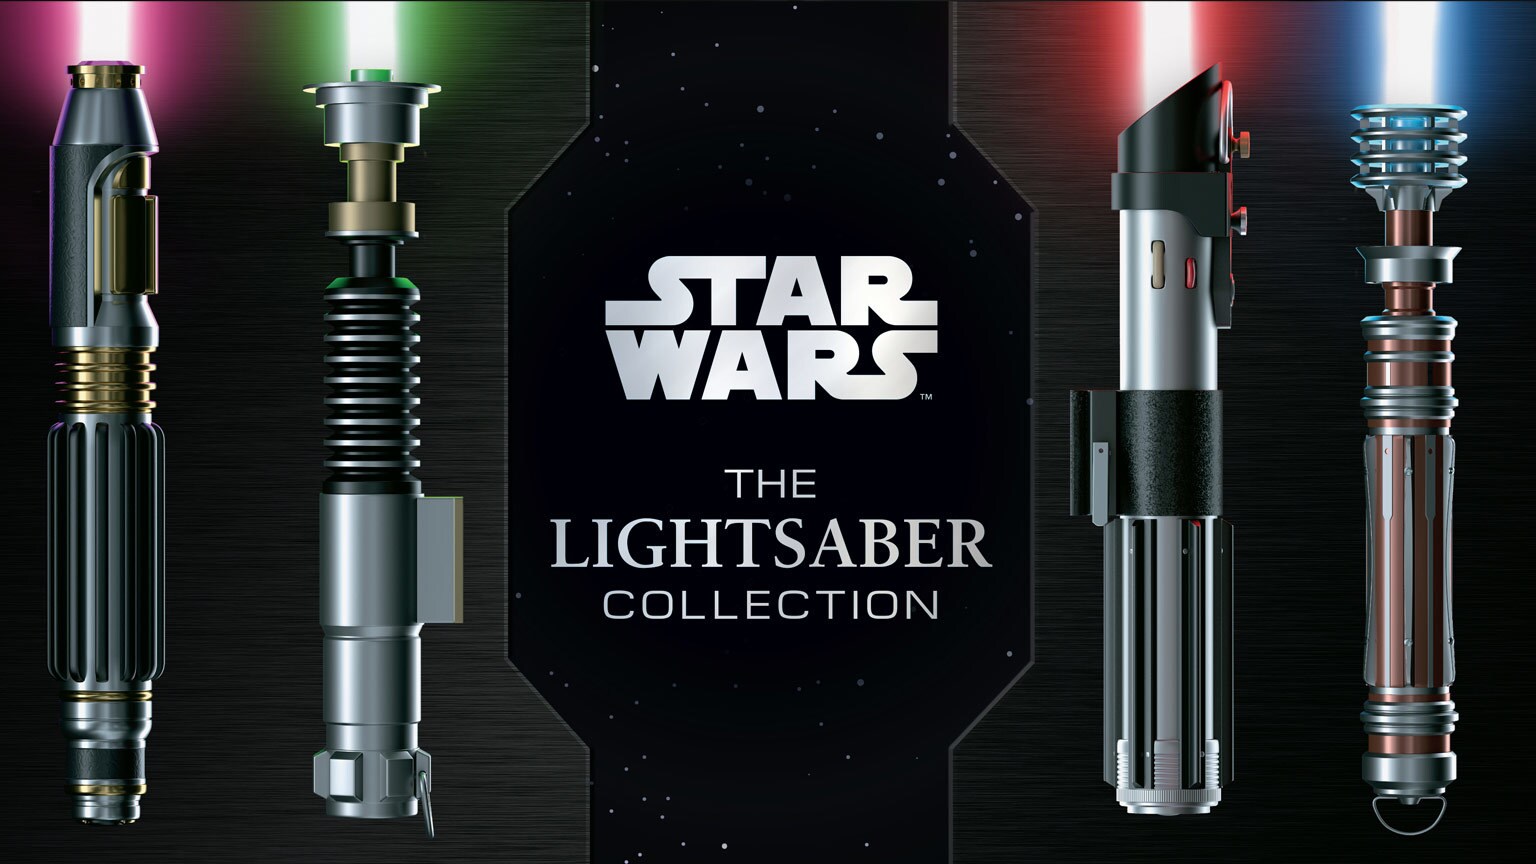 Star Wars: The Lightsaber Collection - First Look | StarWars.com